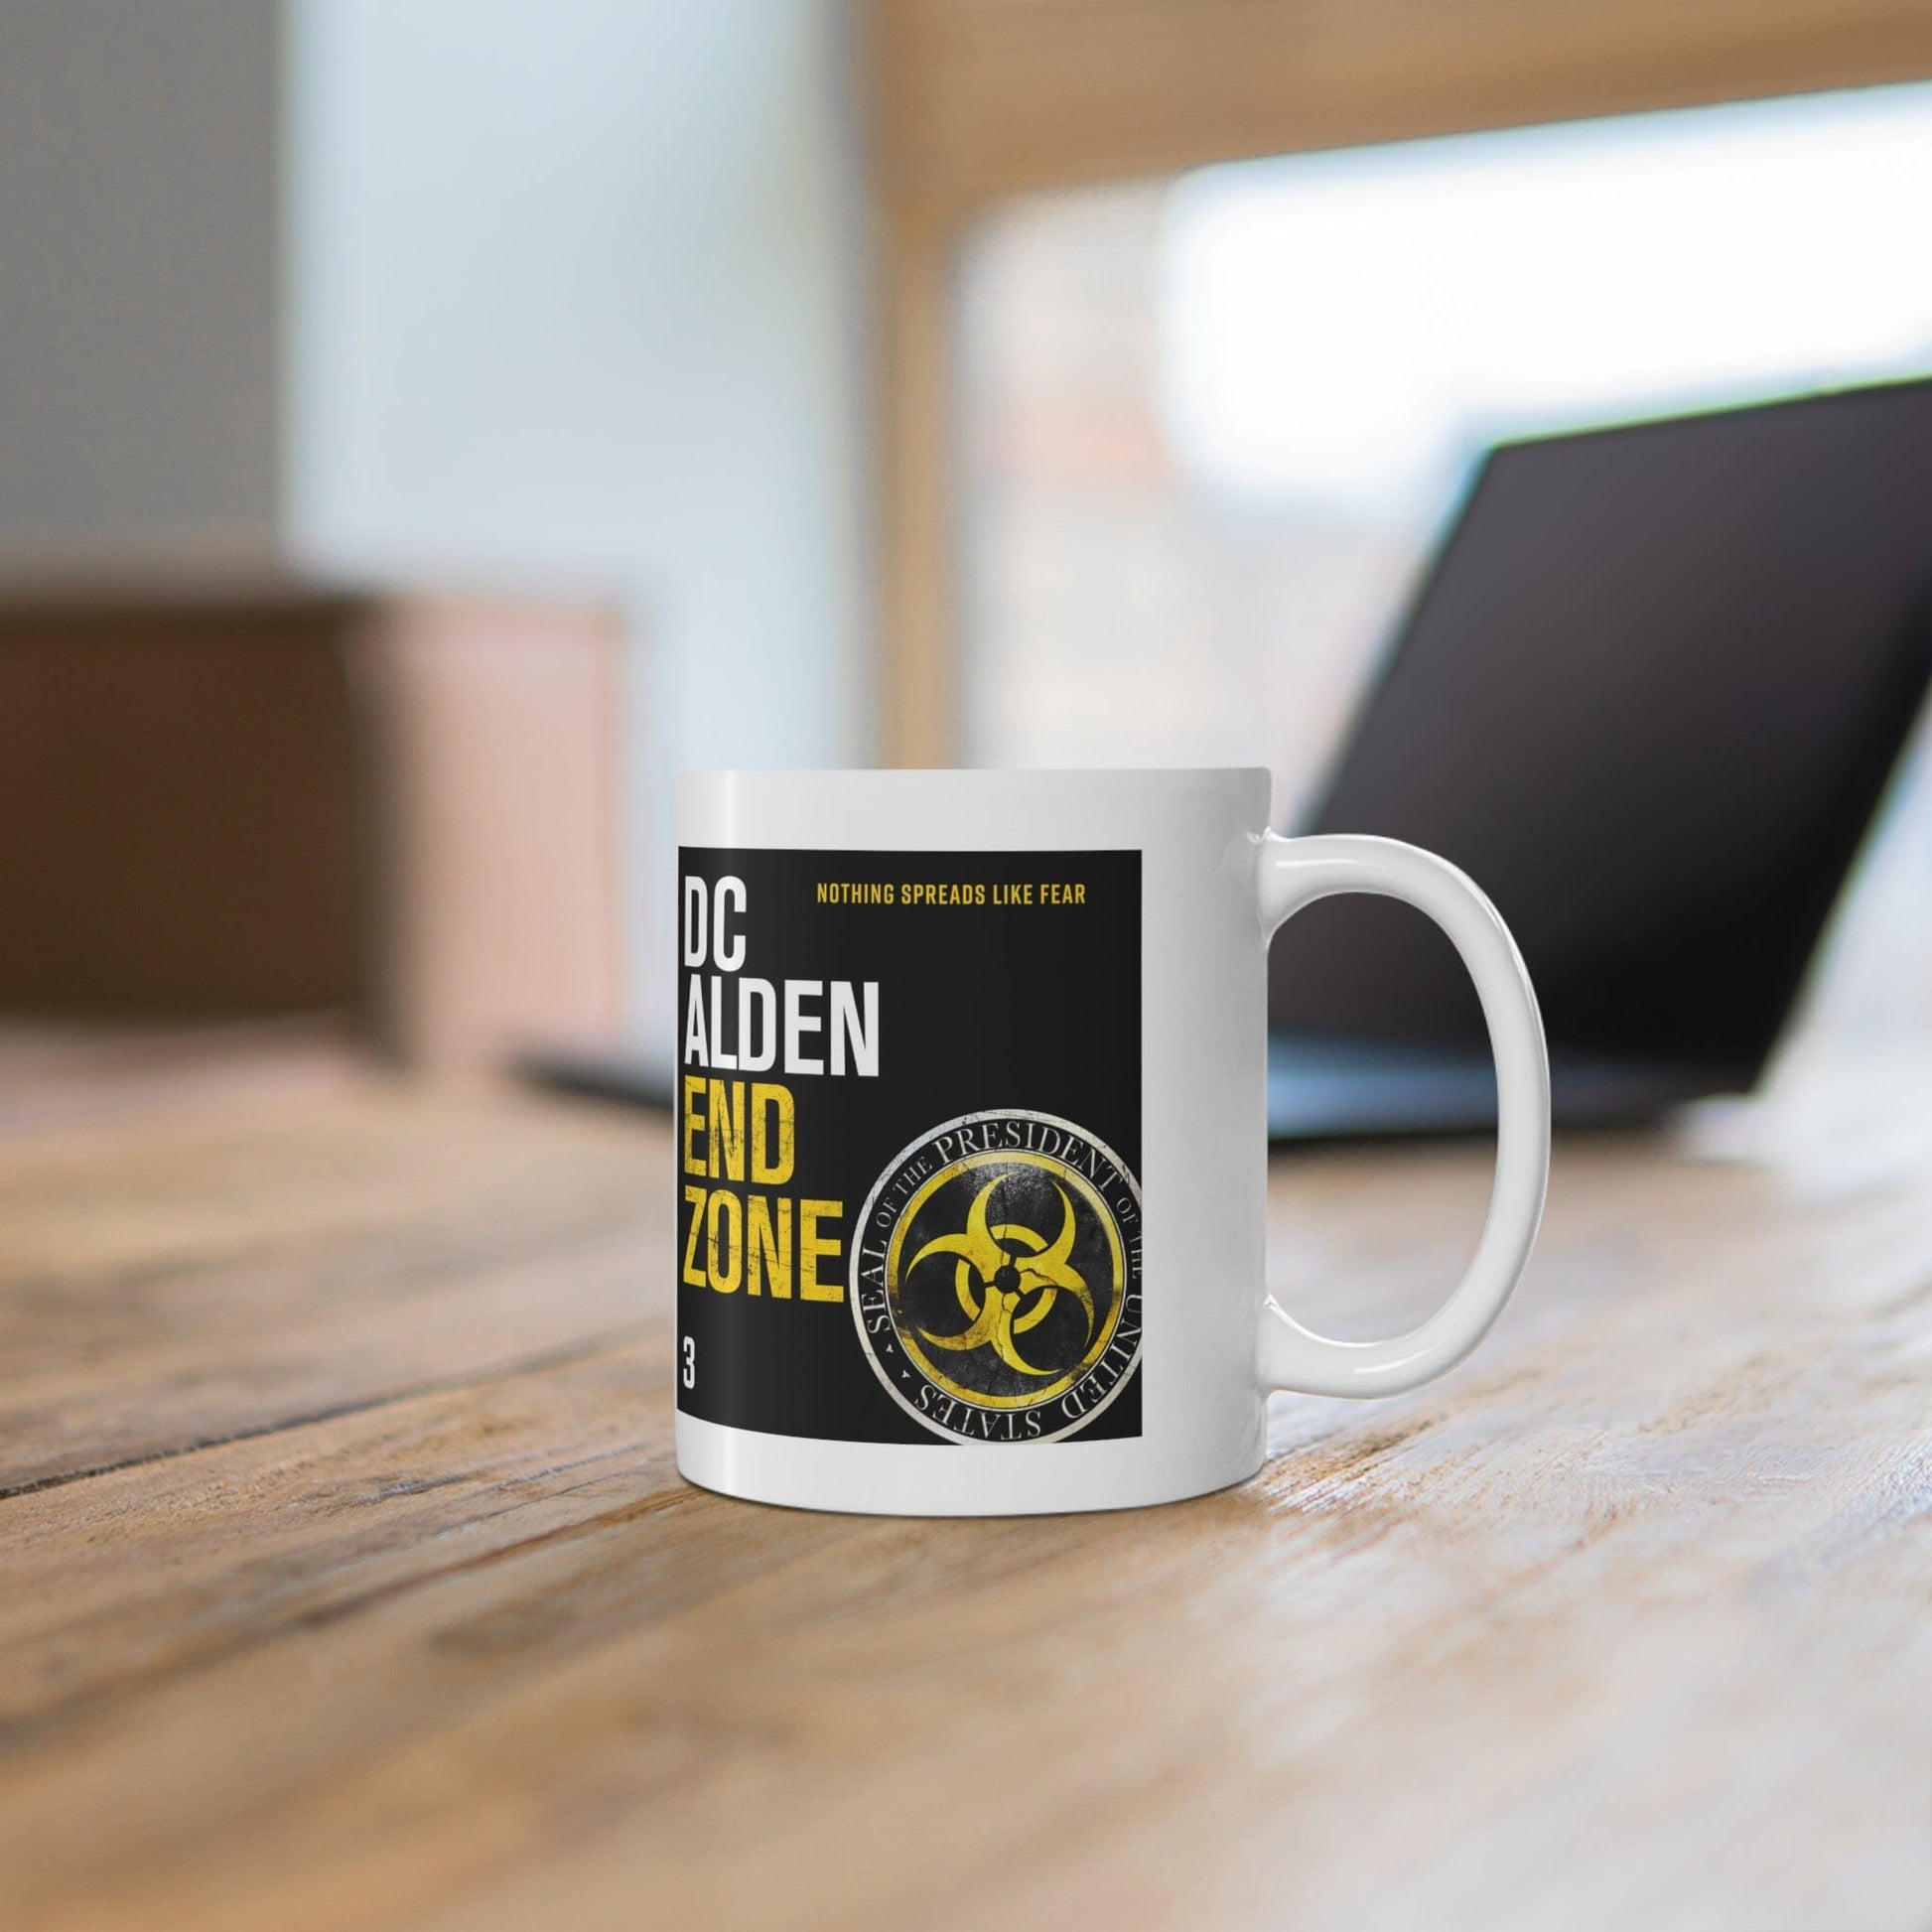 End Zone Coffee Cup - Author DC Alden